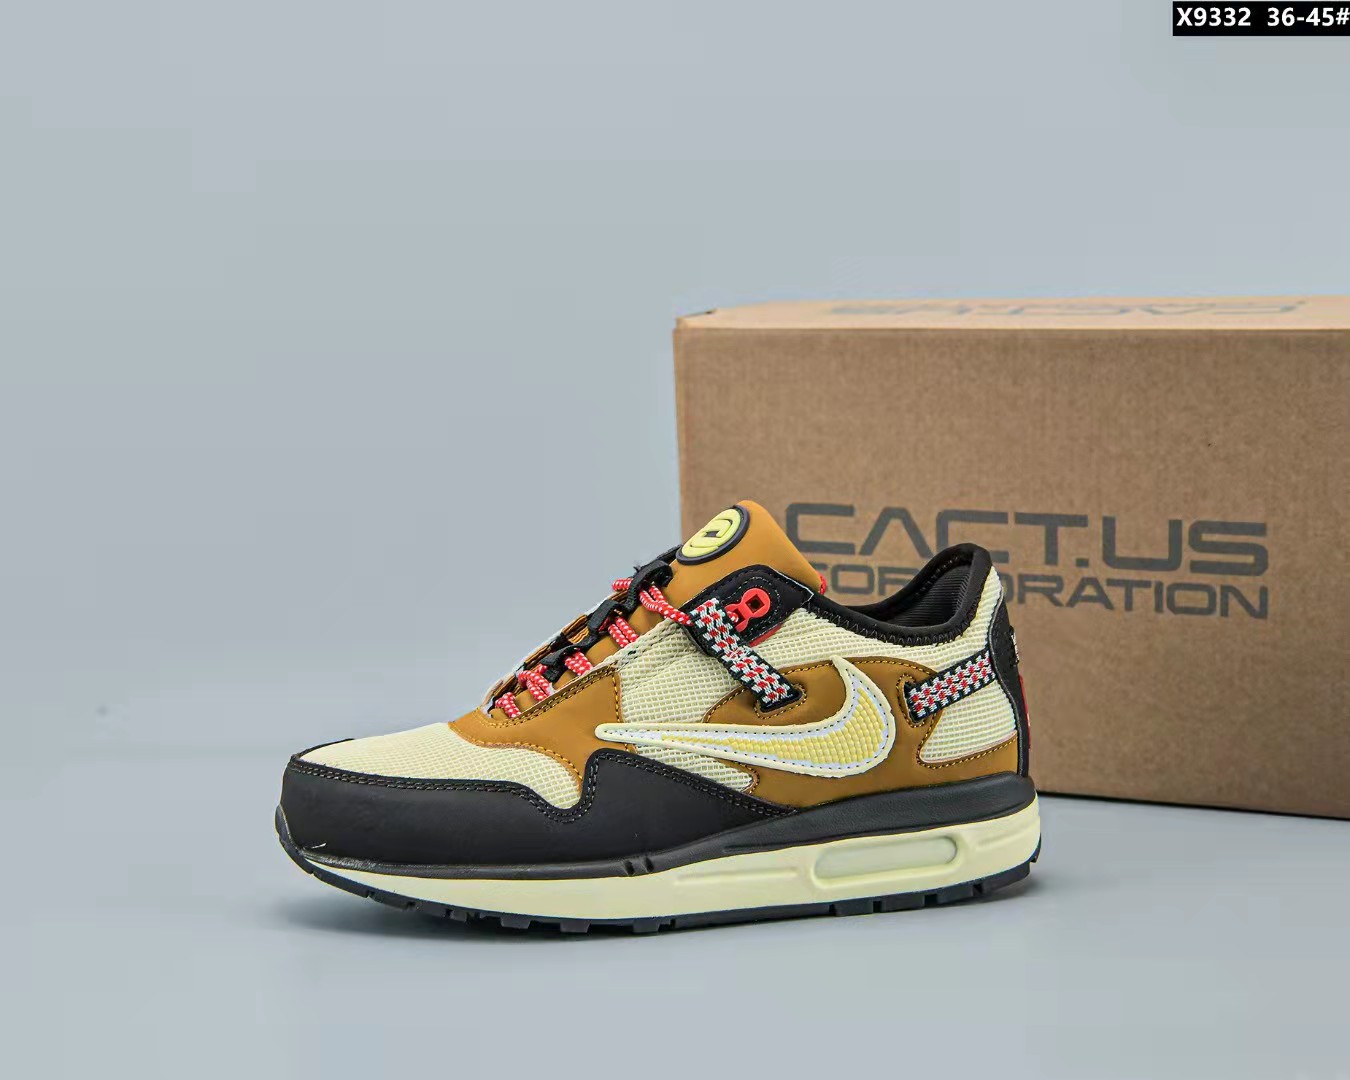 New Nike Air Max 1 Yellow Black Red Shoes